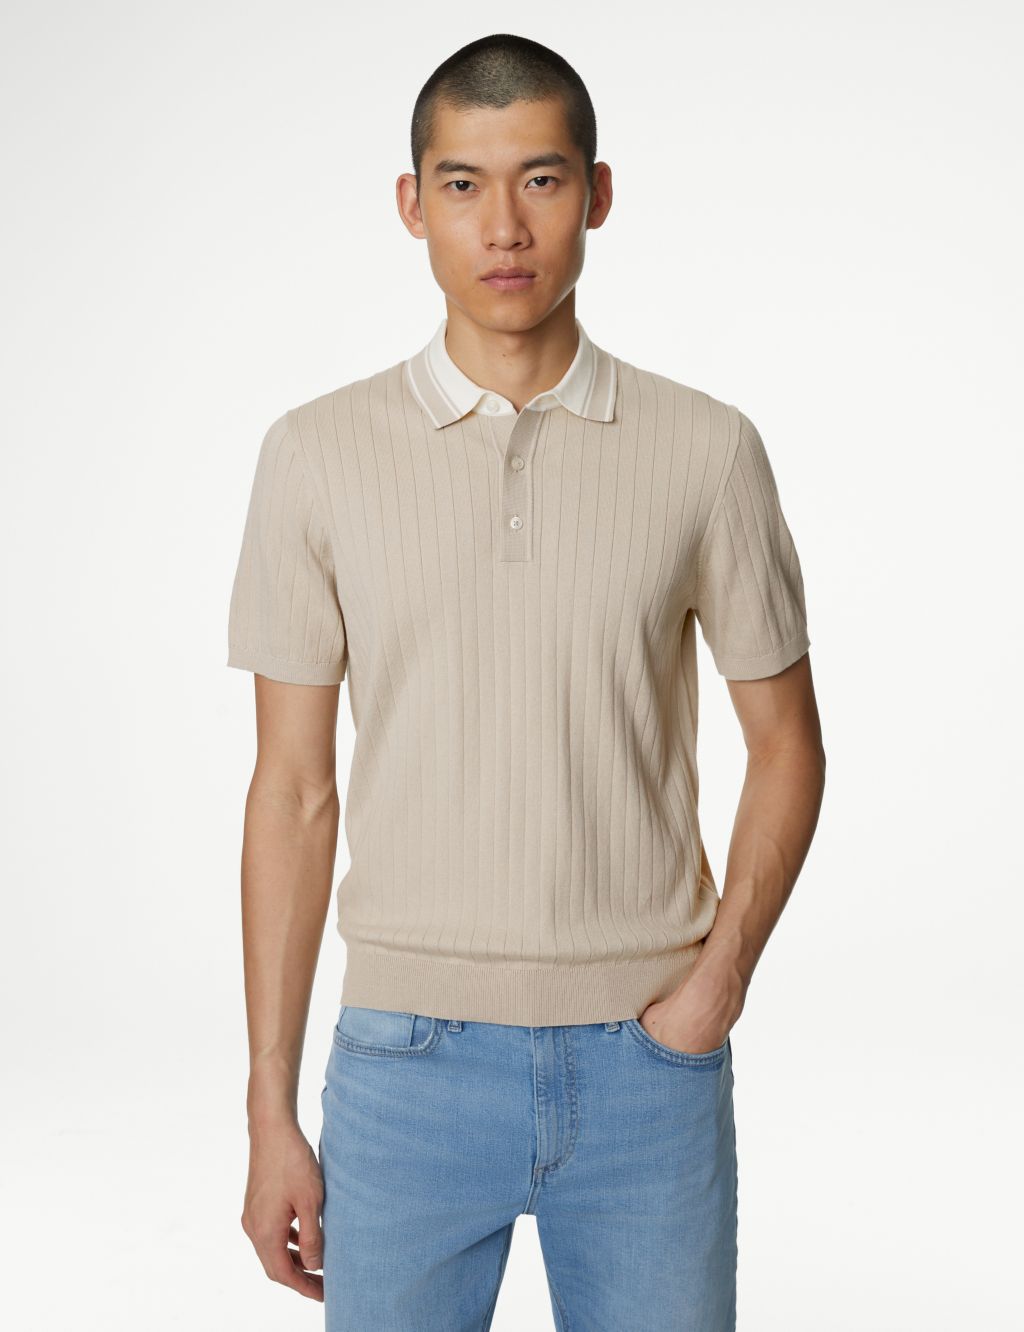 Cotton Rich Ribbed Knitted Polo Shirt